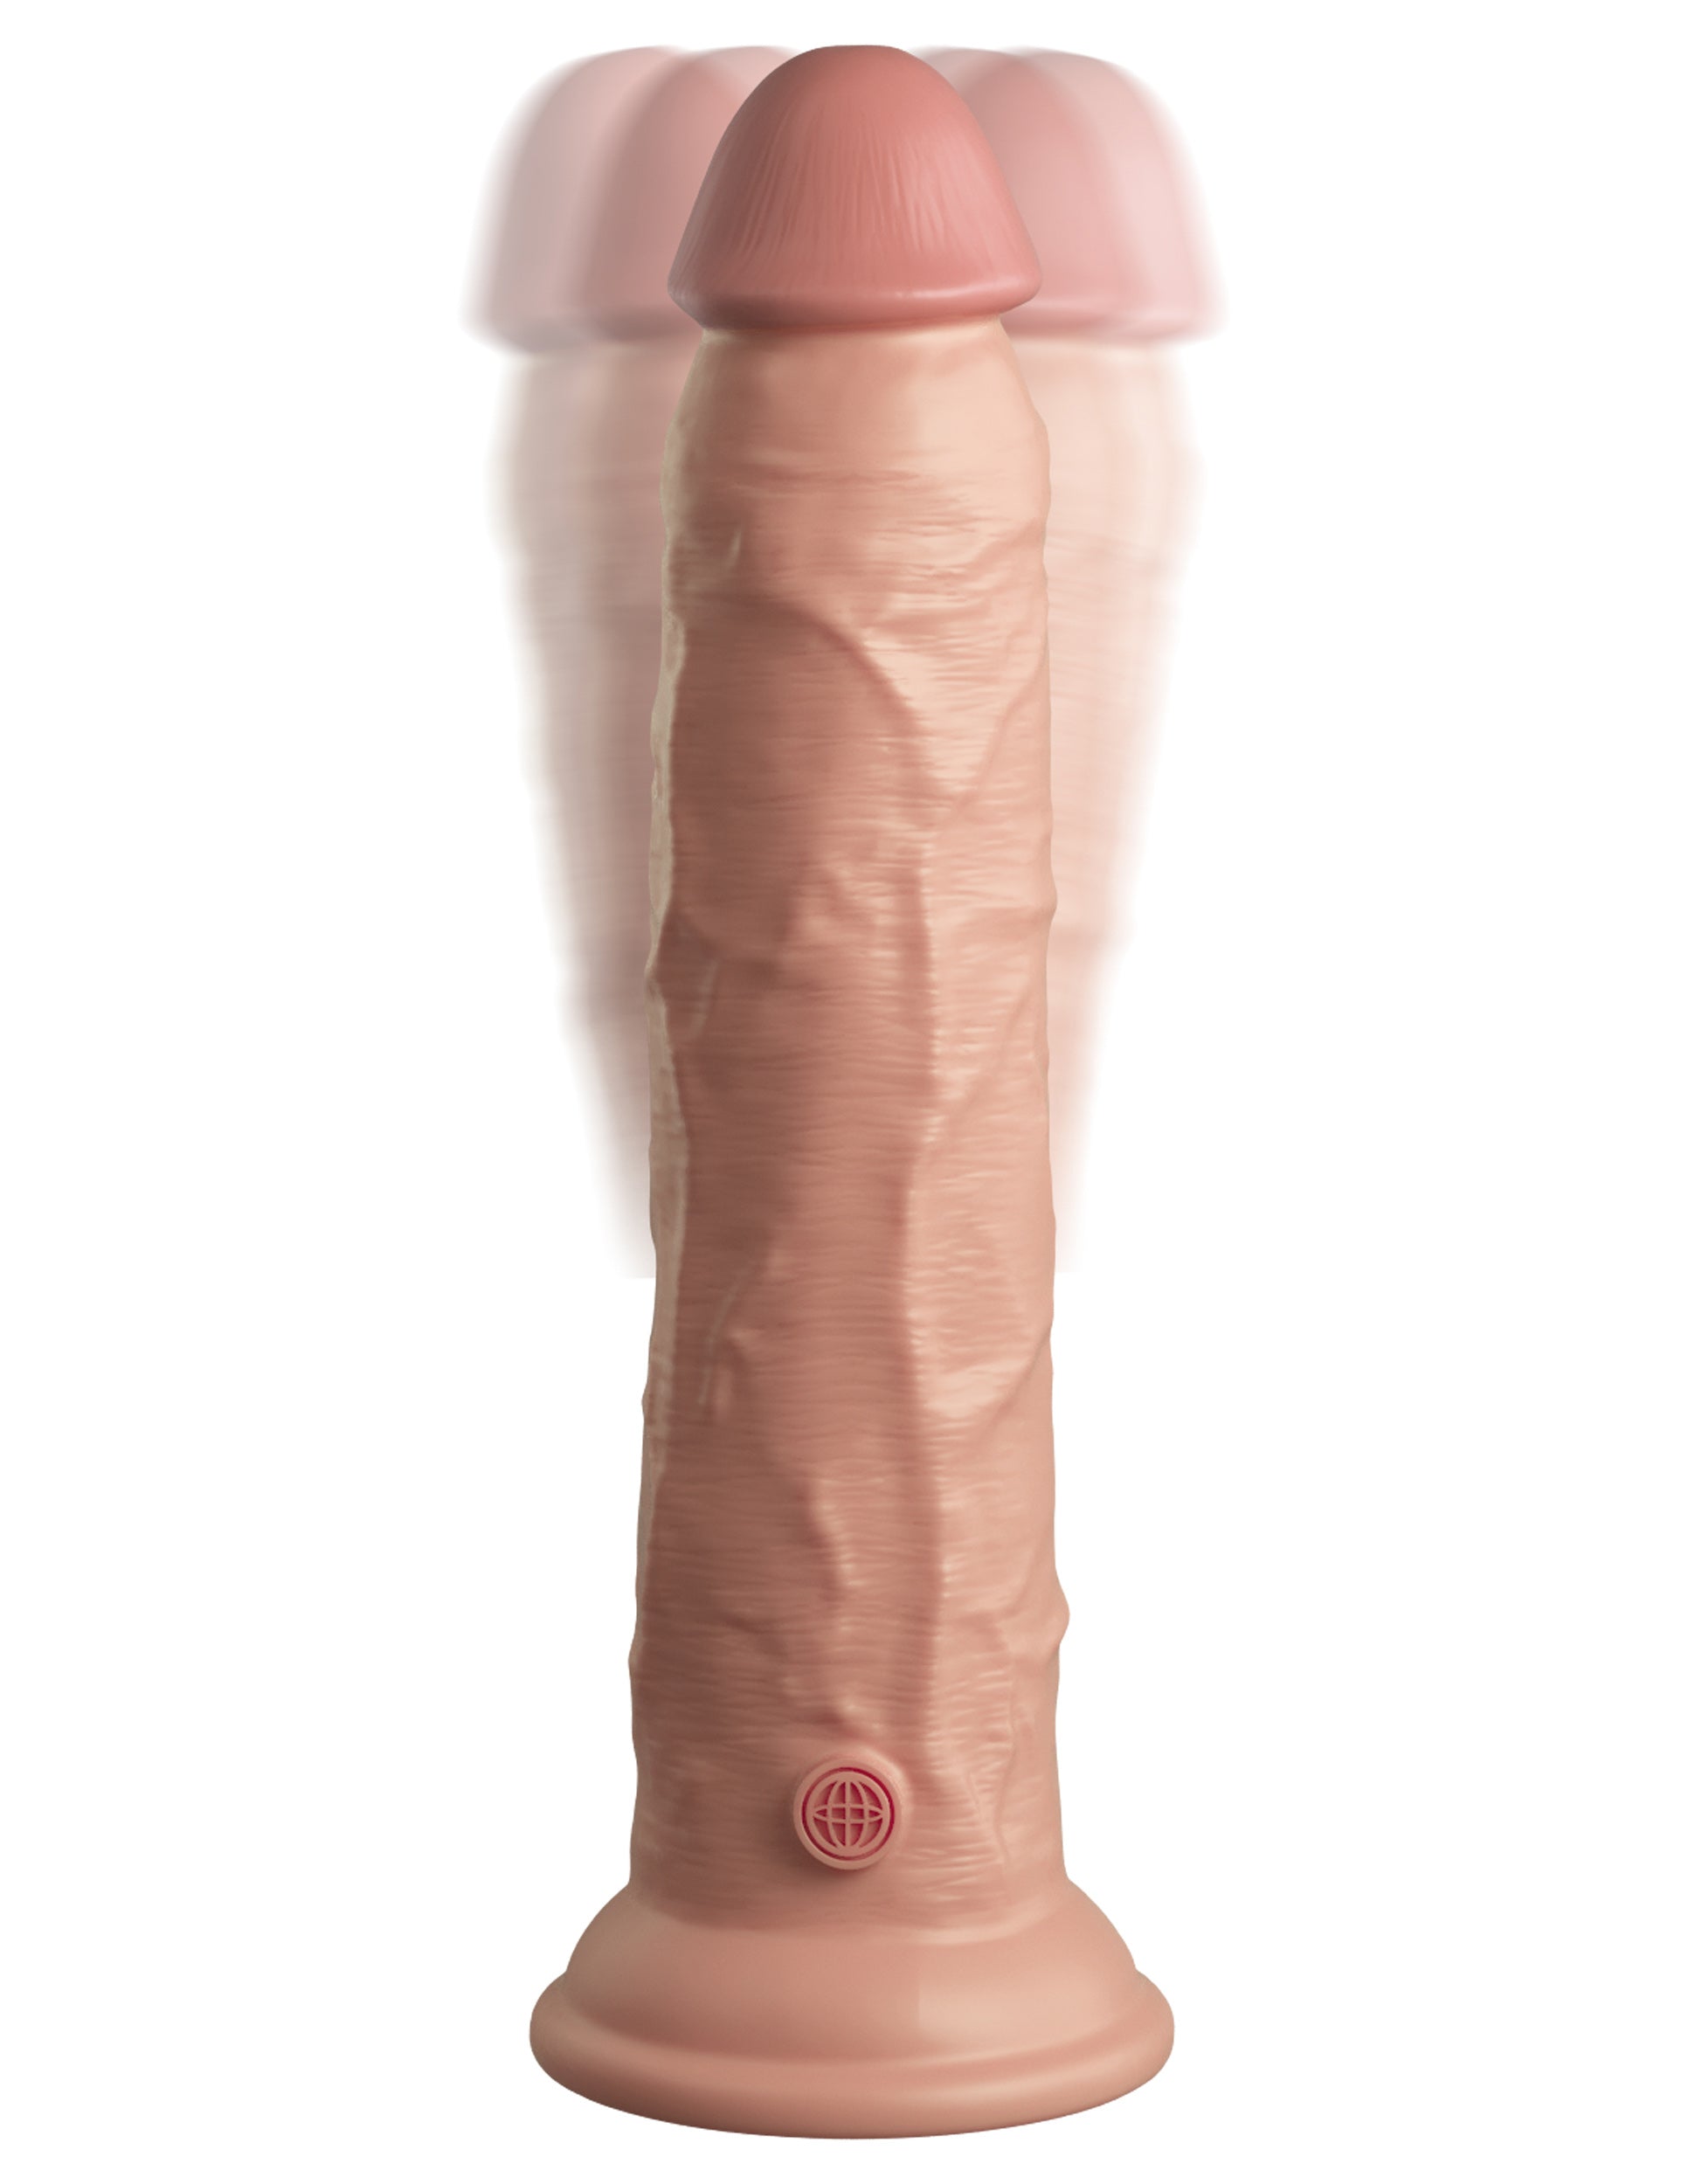 King Cock Elite 9 Inch Vibrating Silicone Dual  Density Cock With Remote - Light-4